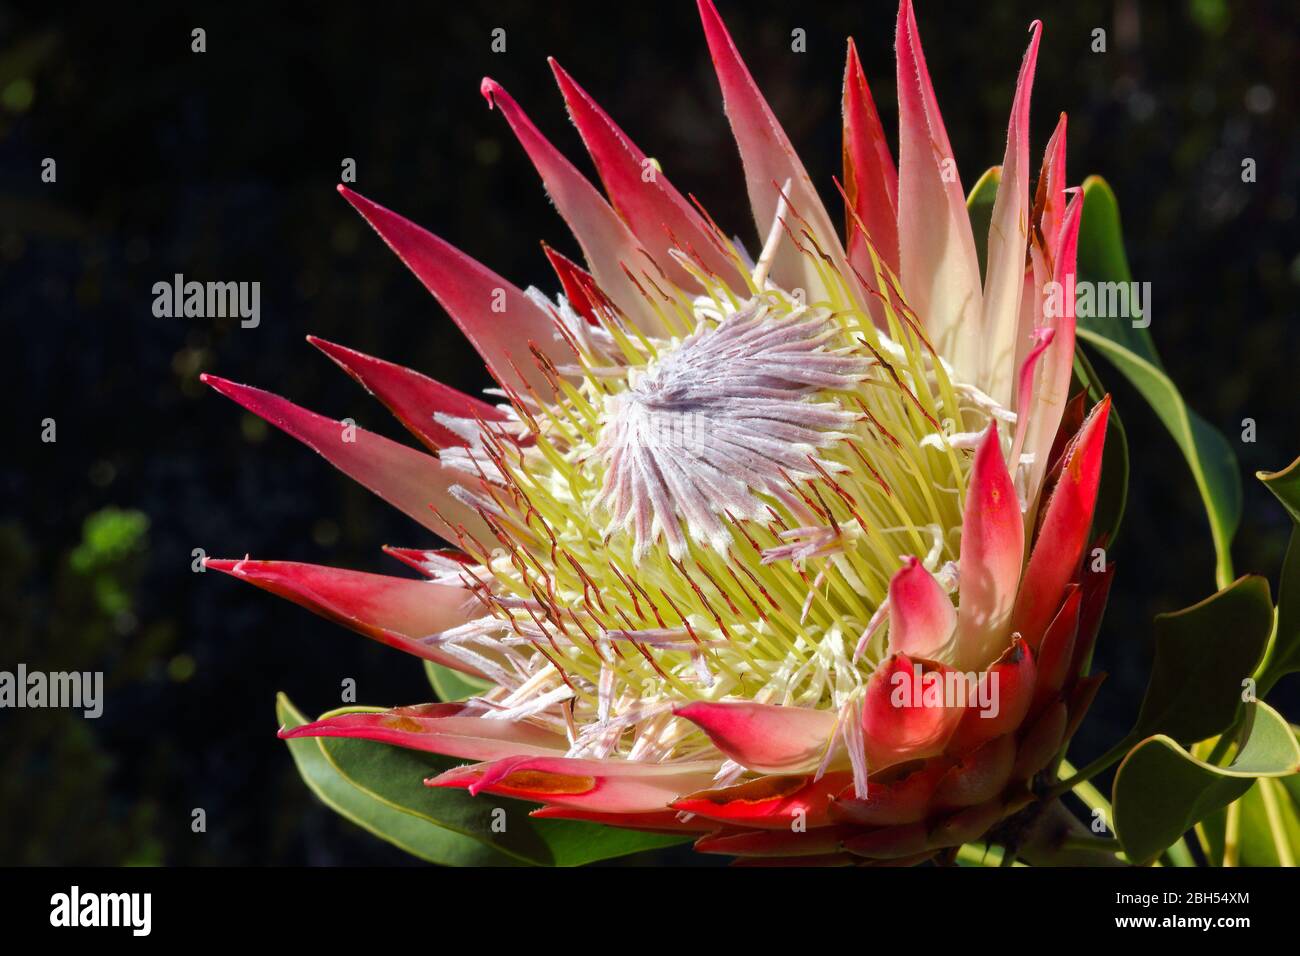 King Protea Flower Head In Full Bloom (Protea cynaroides) Stock Photo